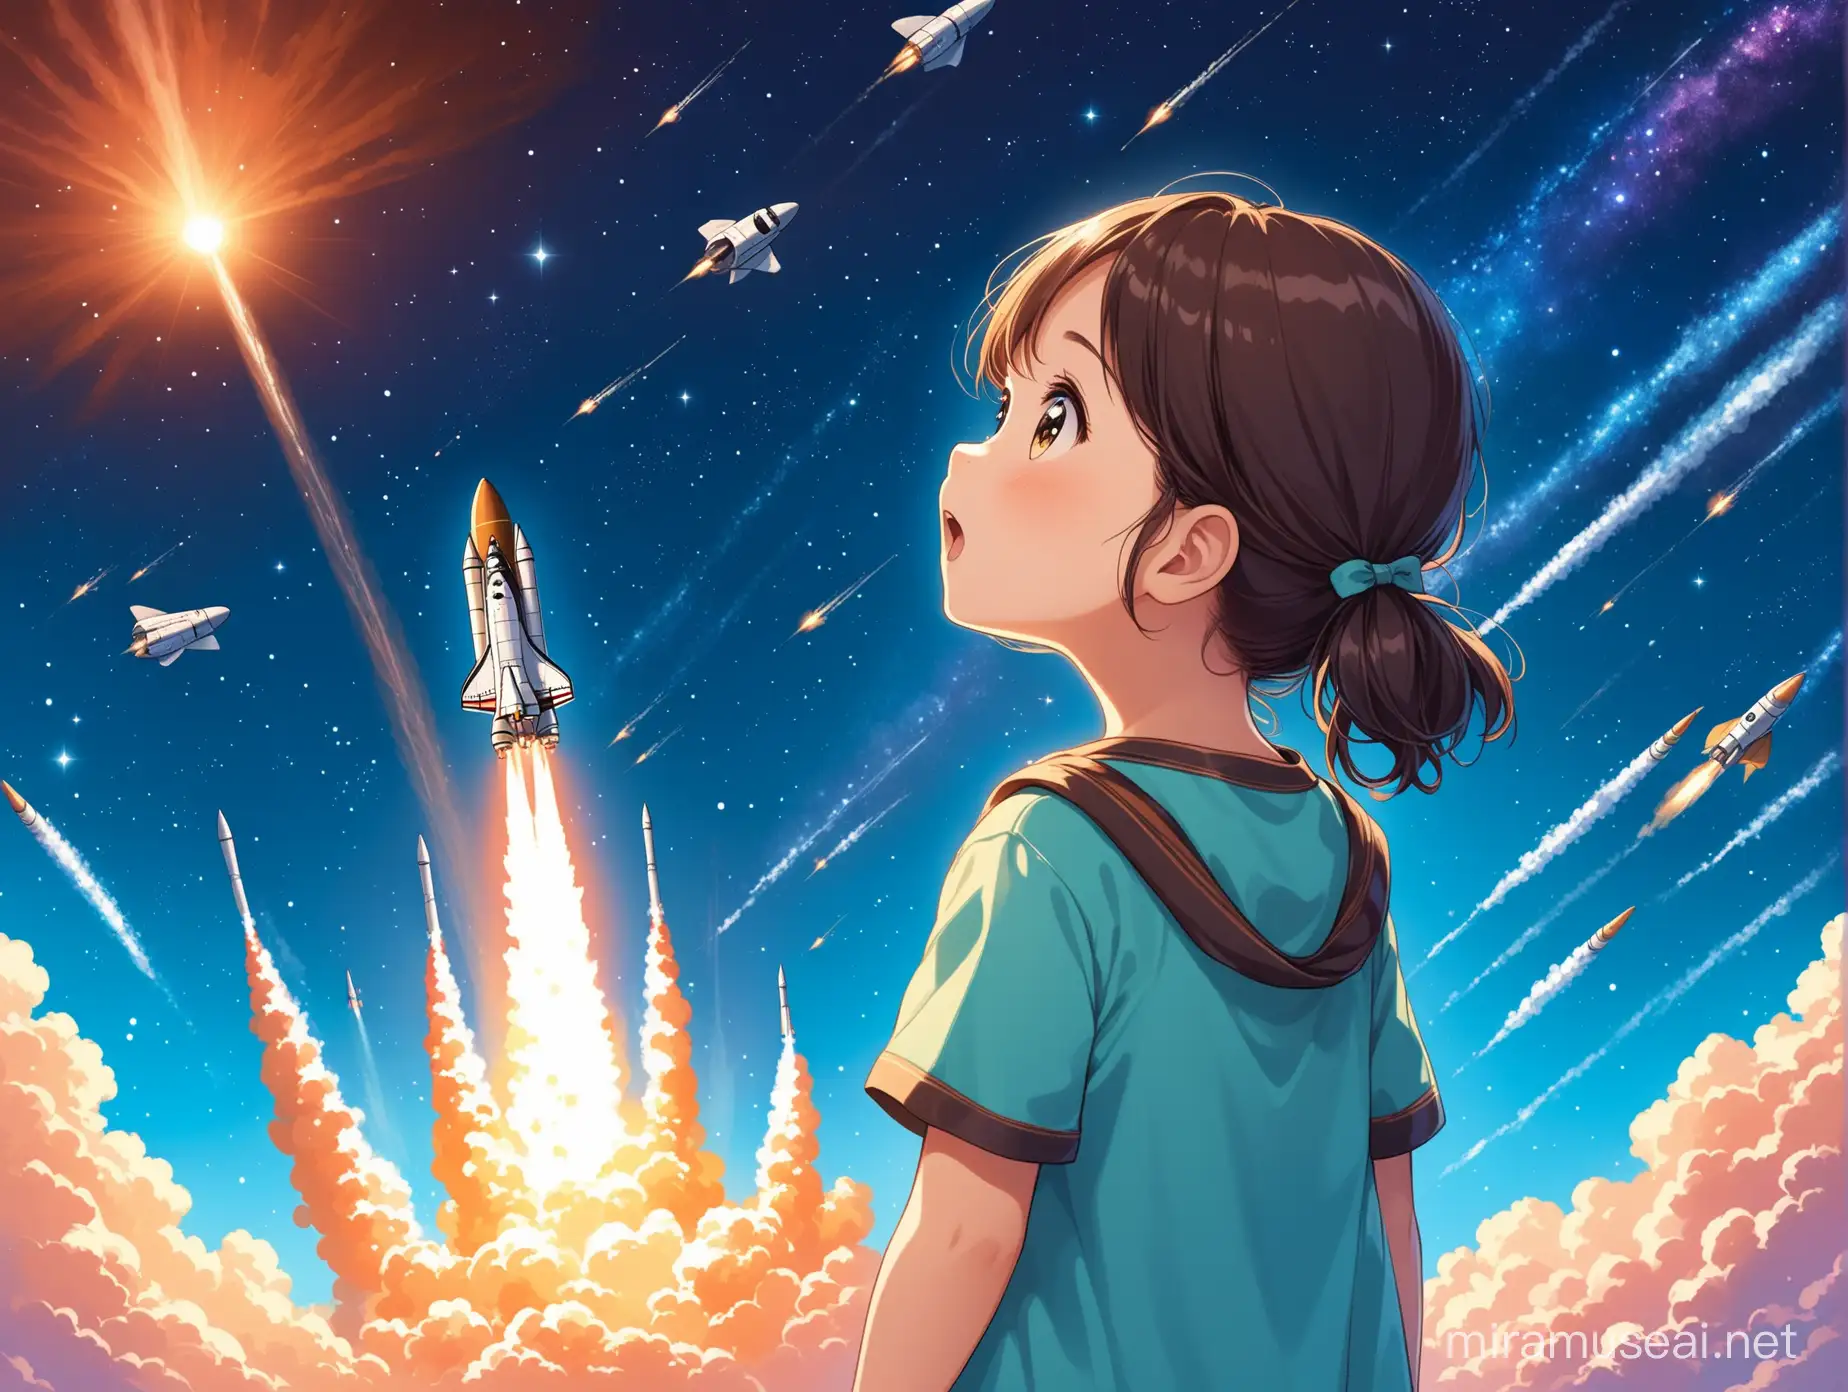 a cute girl looks the sky and sees a spaceship launch.